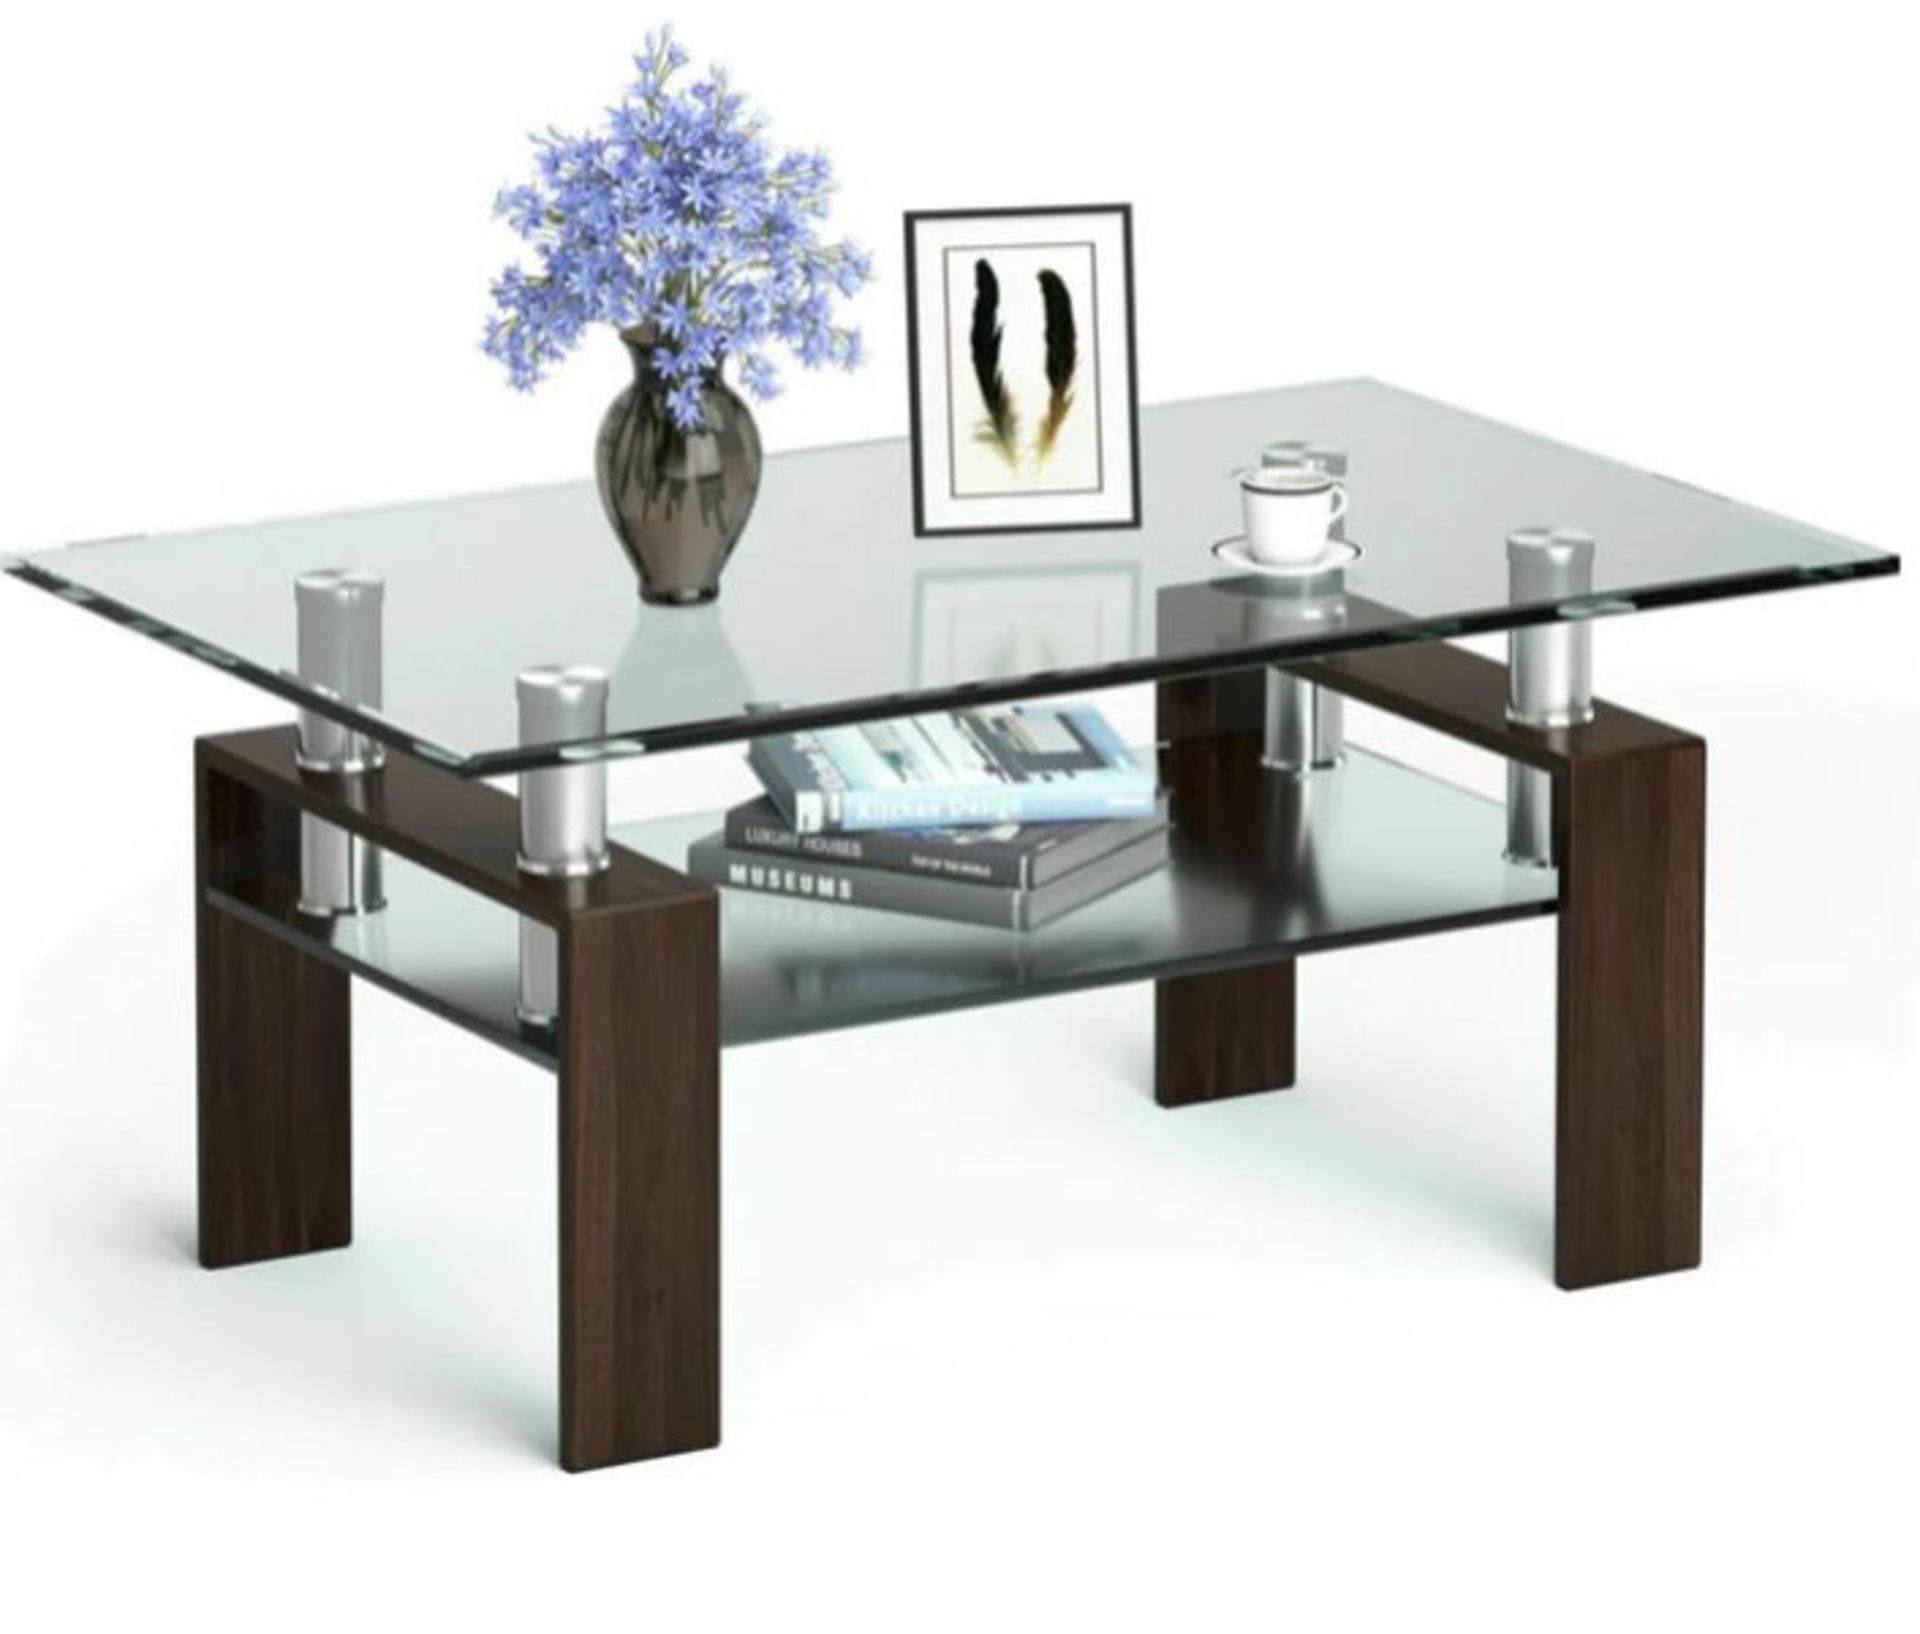 MODERN GLASS COFFEE TEA TABLE WITH OPEN SHELF-COFFEE. - ER53. The 2-tier design provides a lot of